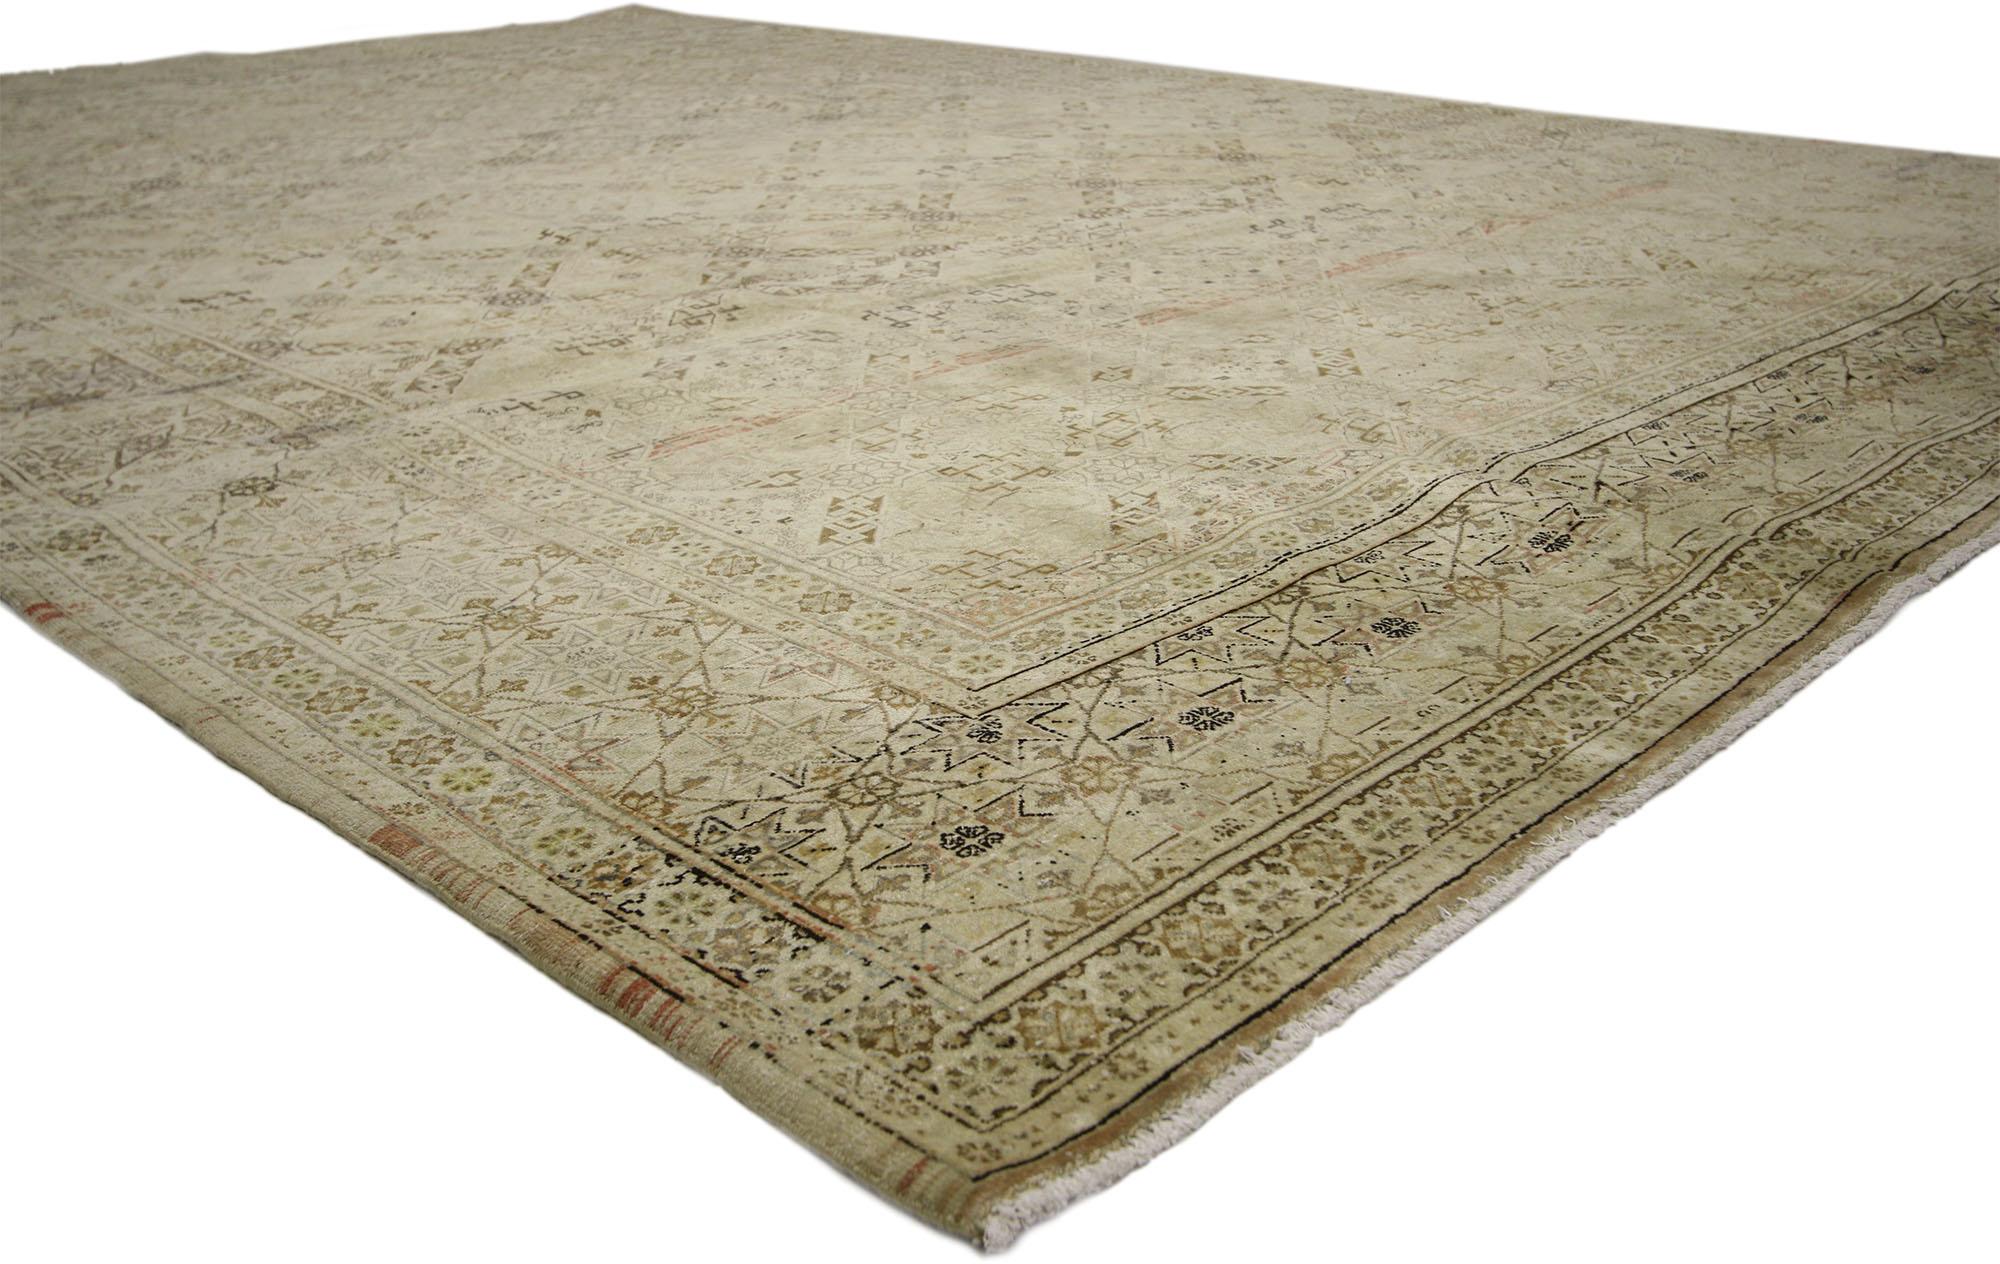 60689, vintage Persian Tabriz rug with warm, neutral colors. Timeless style and geometric ornaments based on traditional Islamic tile artwork design meld together beautifully in this hand knotted wool vintage Persian Tabriz rug. Warm, neutral